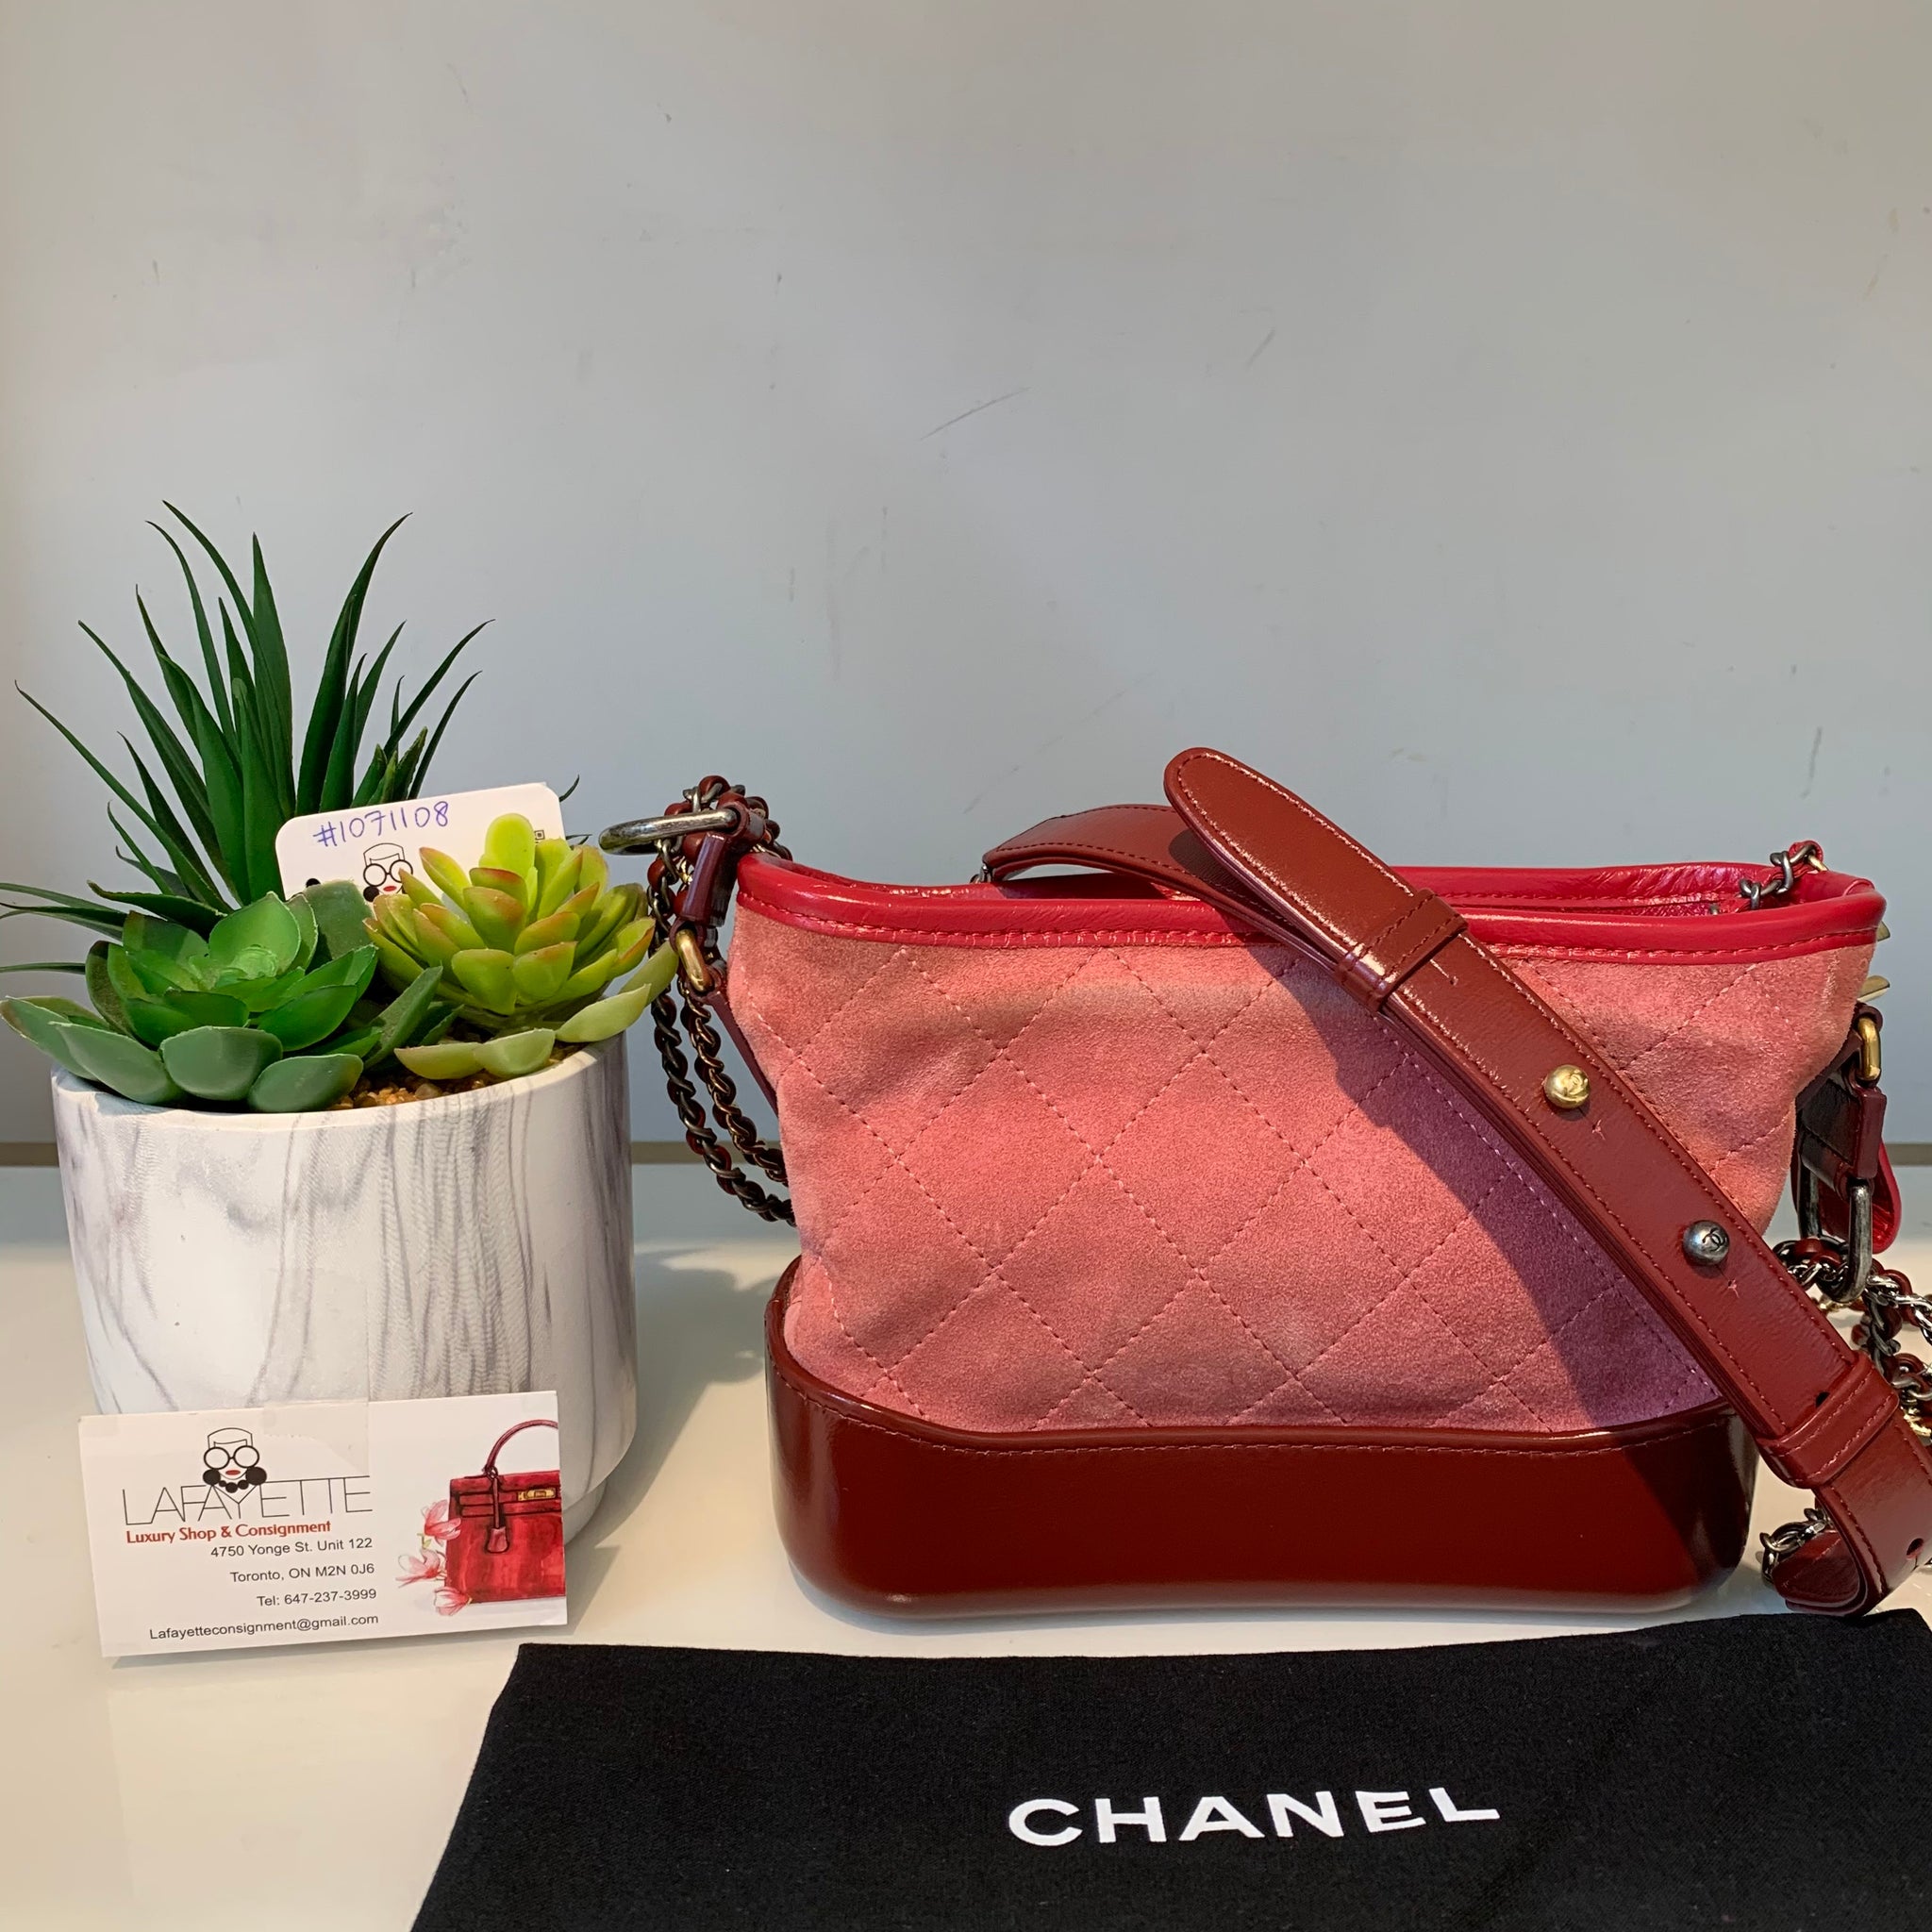 Chanel Gabrielle Small Model Shoulder Bag in Red Canvas and Red